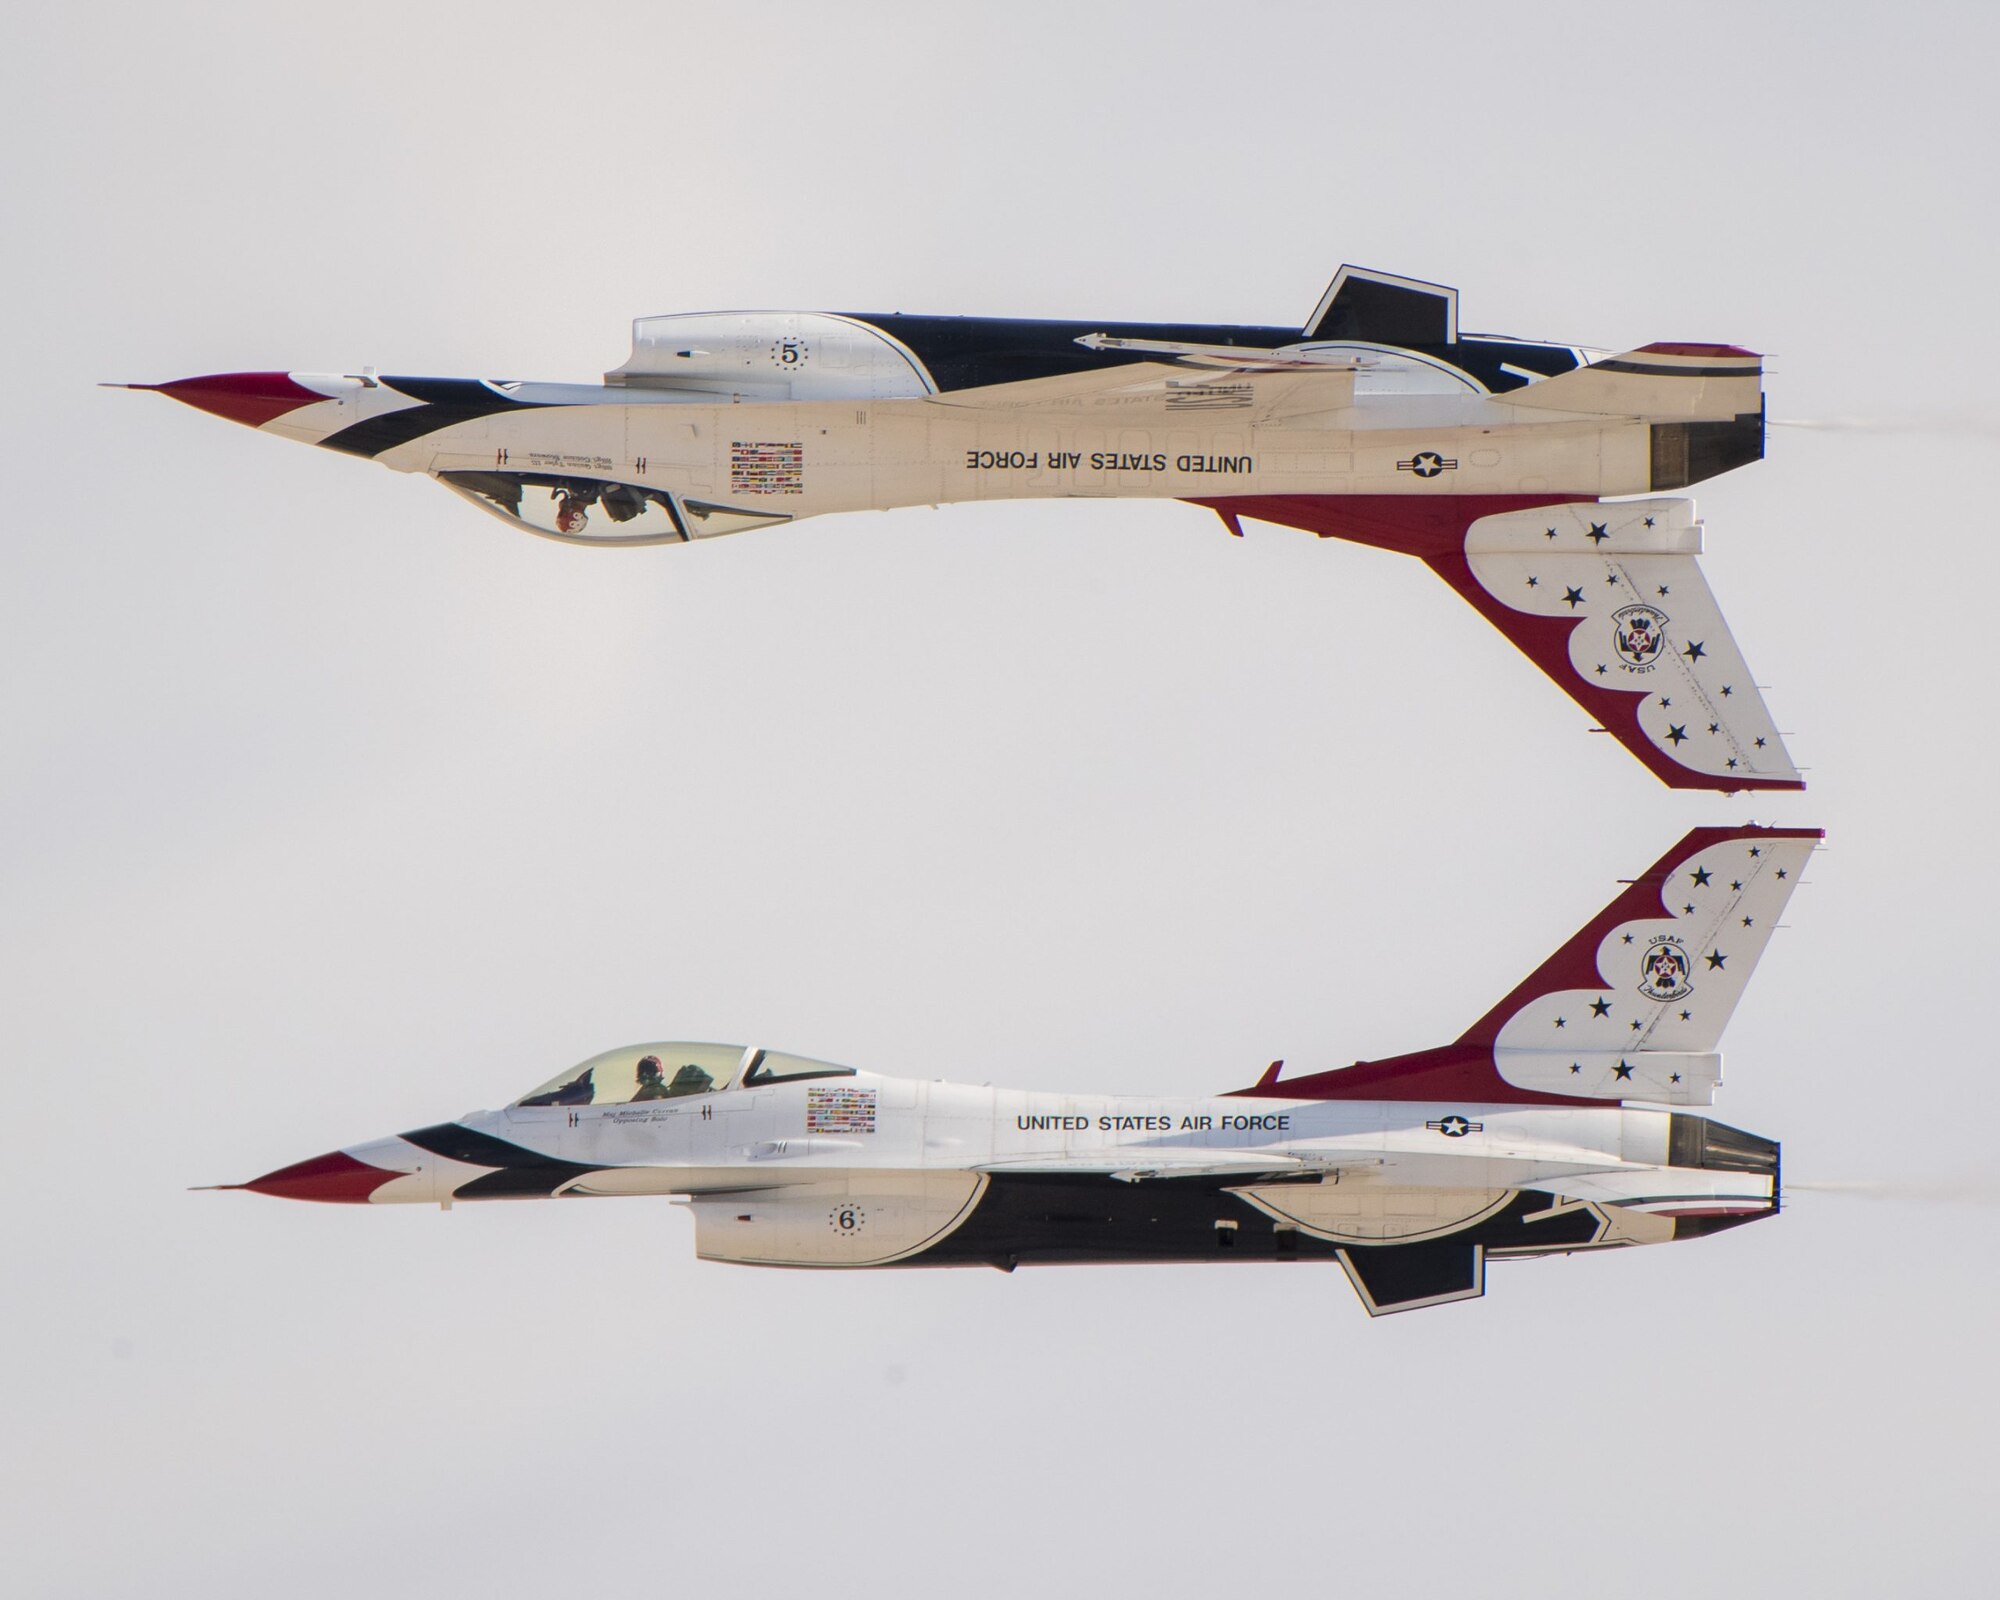 The U.S. Air Force Air Demonstration Squadron “Thunderbirds” conduct a practice performance, November 15, 2019 at Nellis Air Force Base, Nev., in preparation for the Aviation Nation air show. This show will mark the culmination of the Thunderbirds’ 2019 show season.